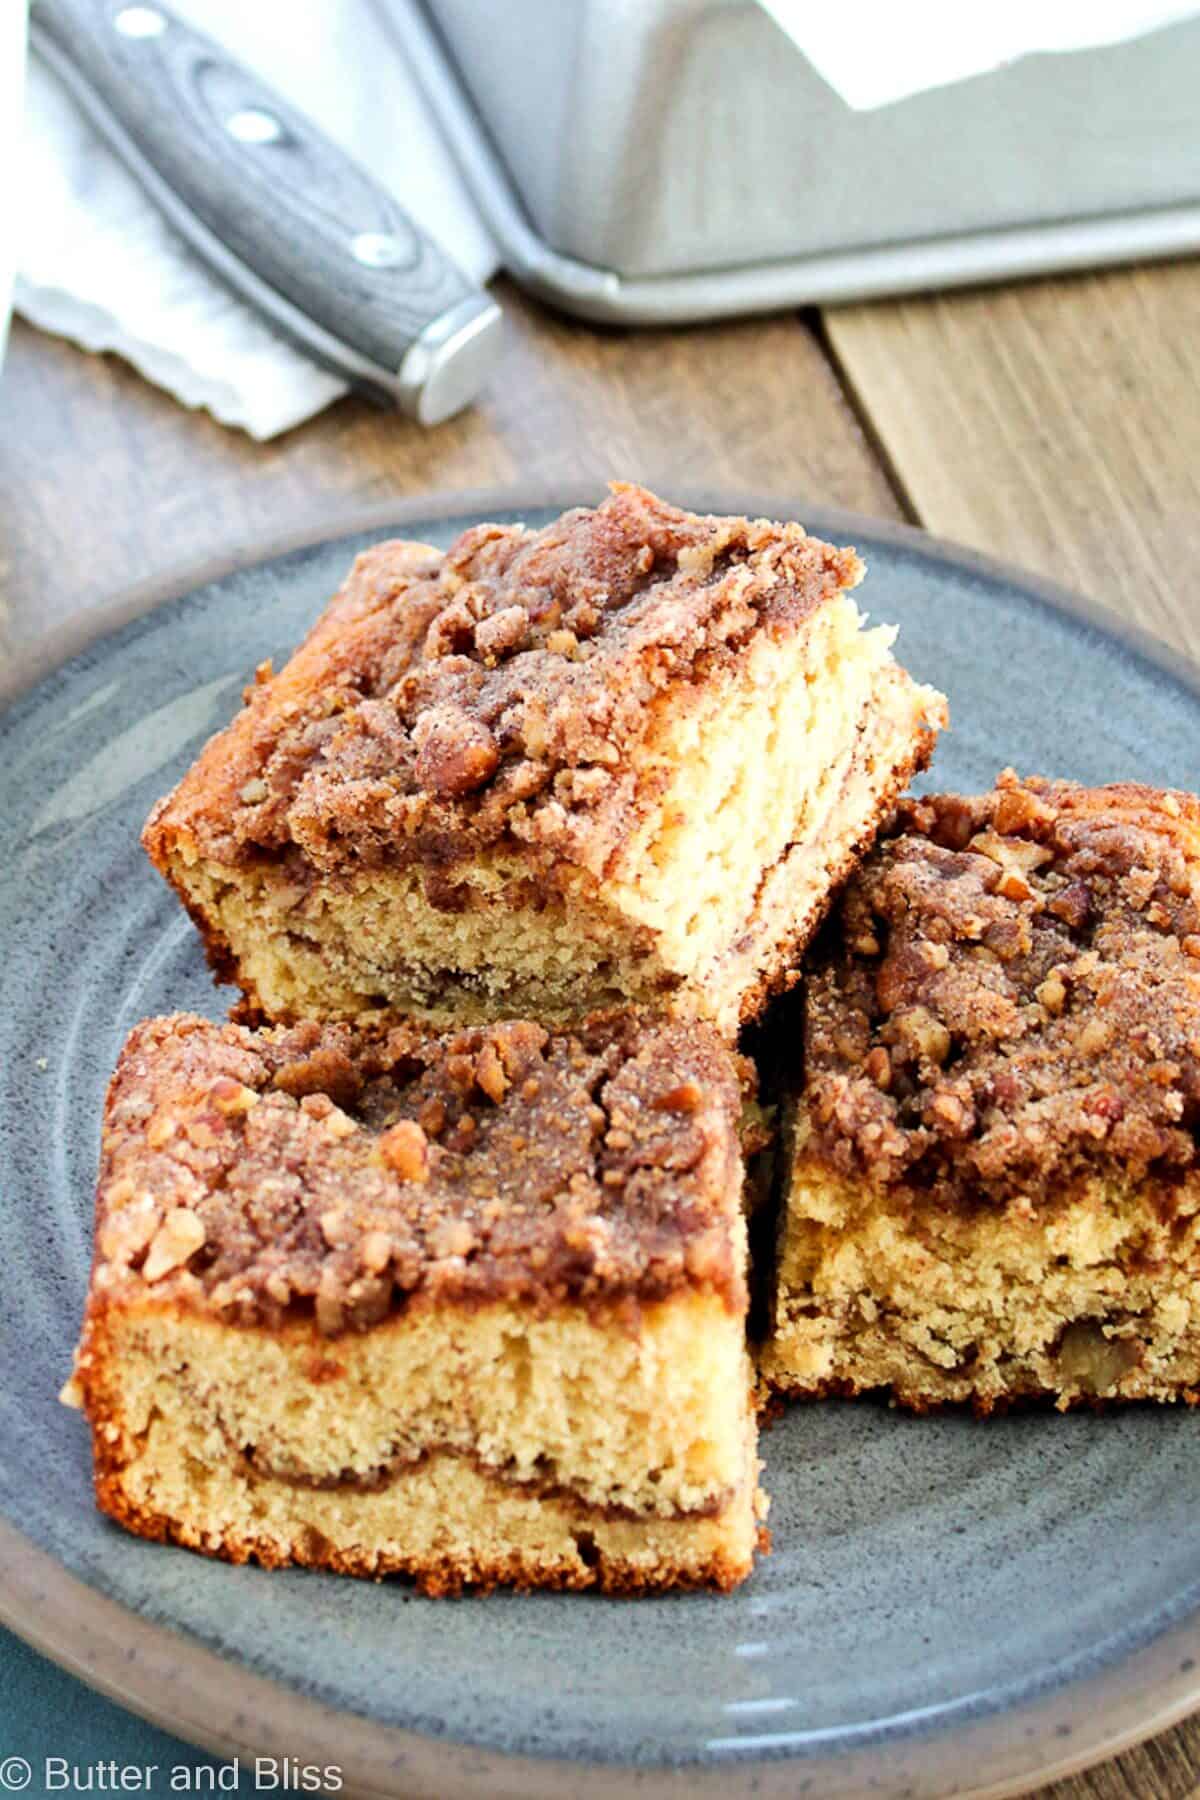 Plate of applesauce coffee cake slices